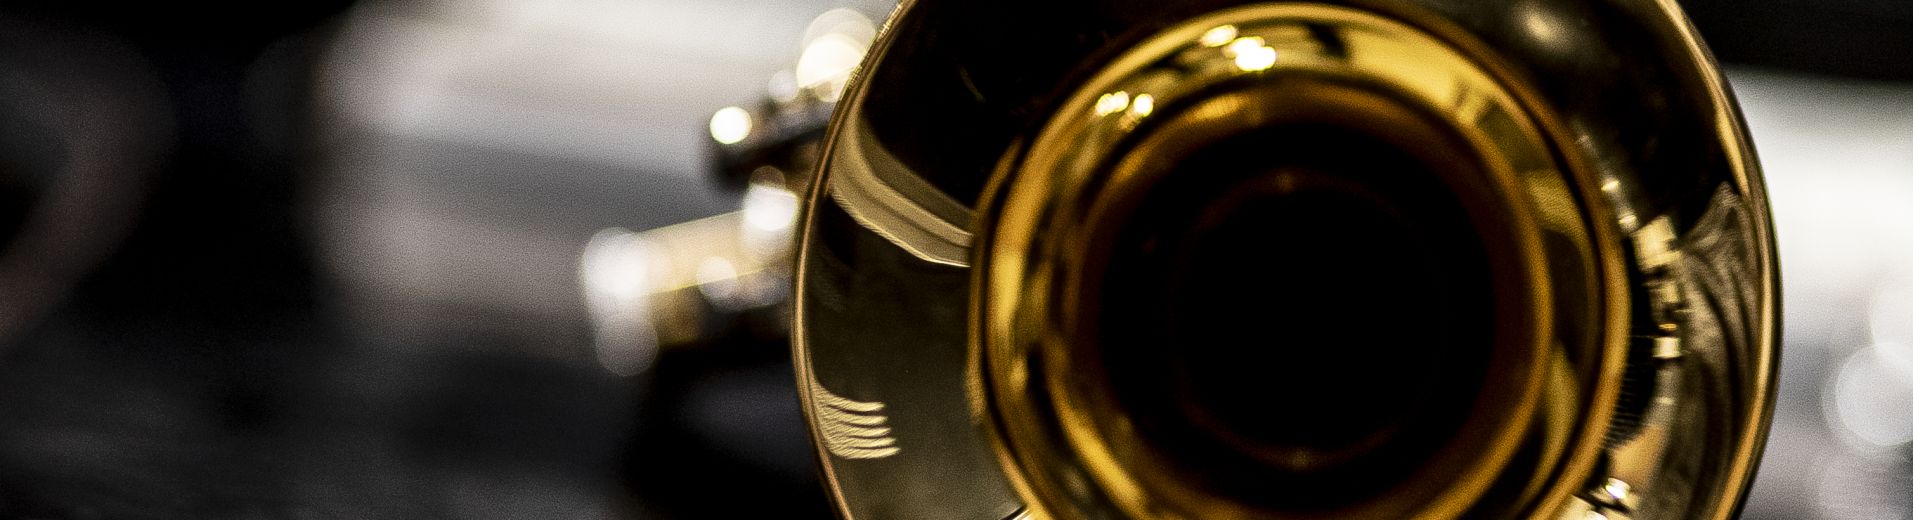 Close up image of trumpet bell